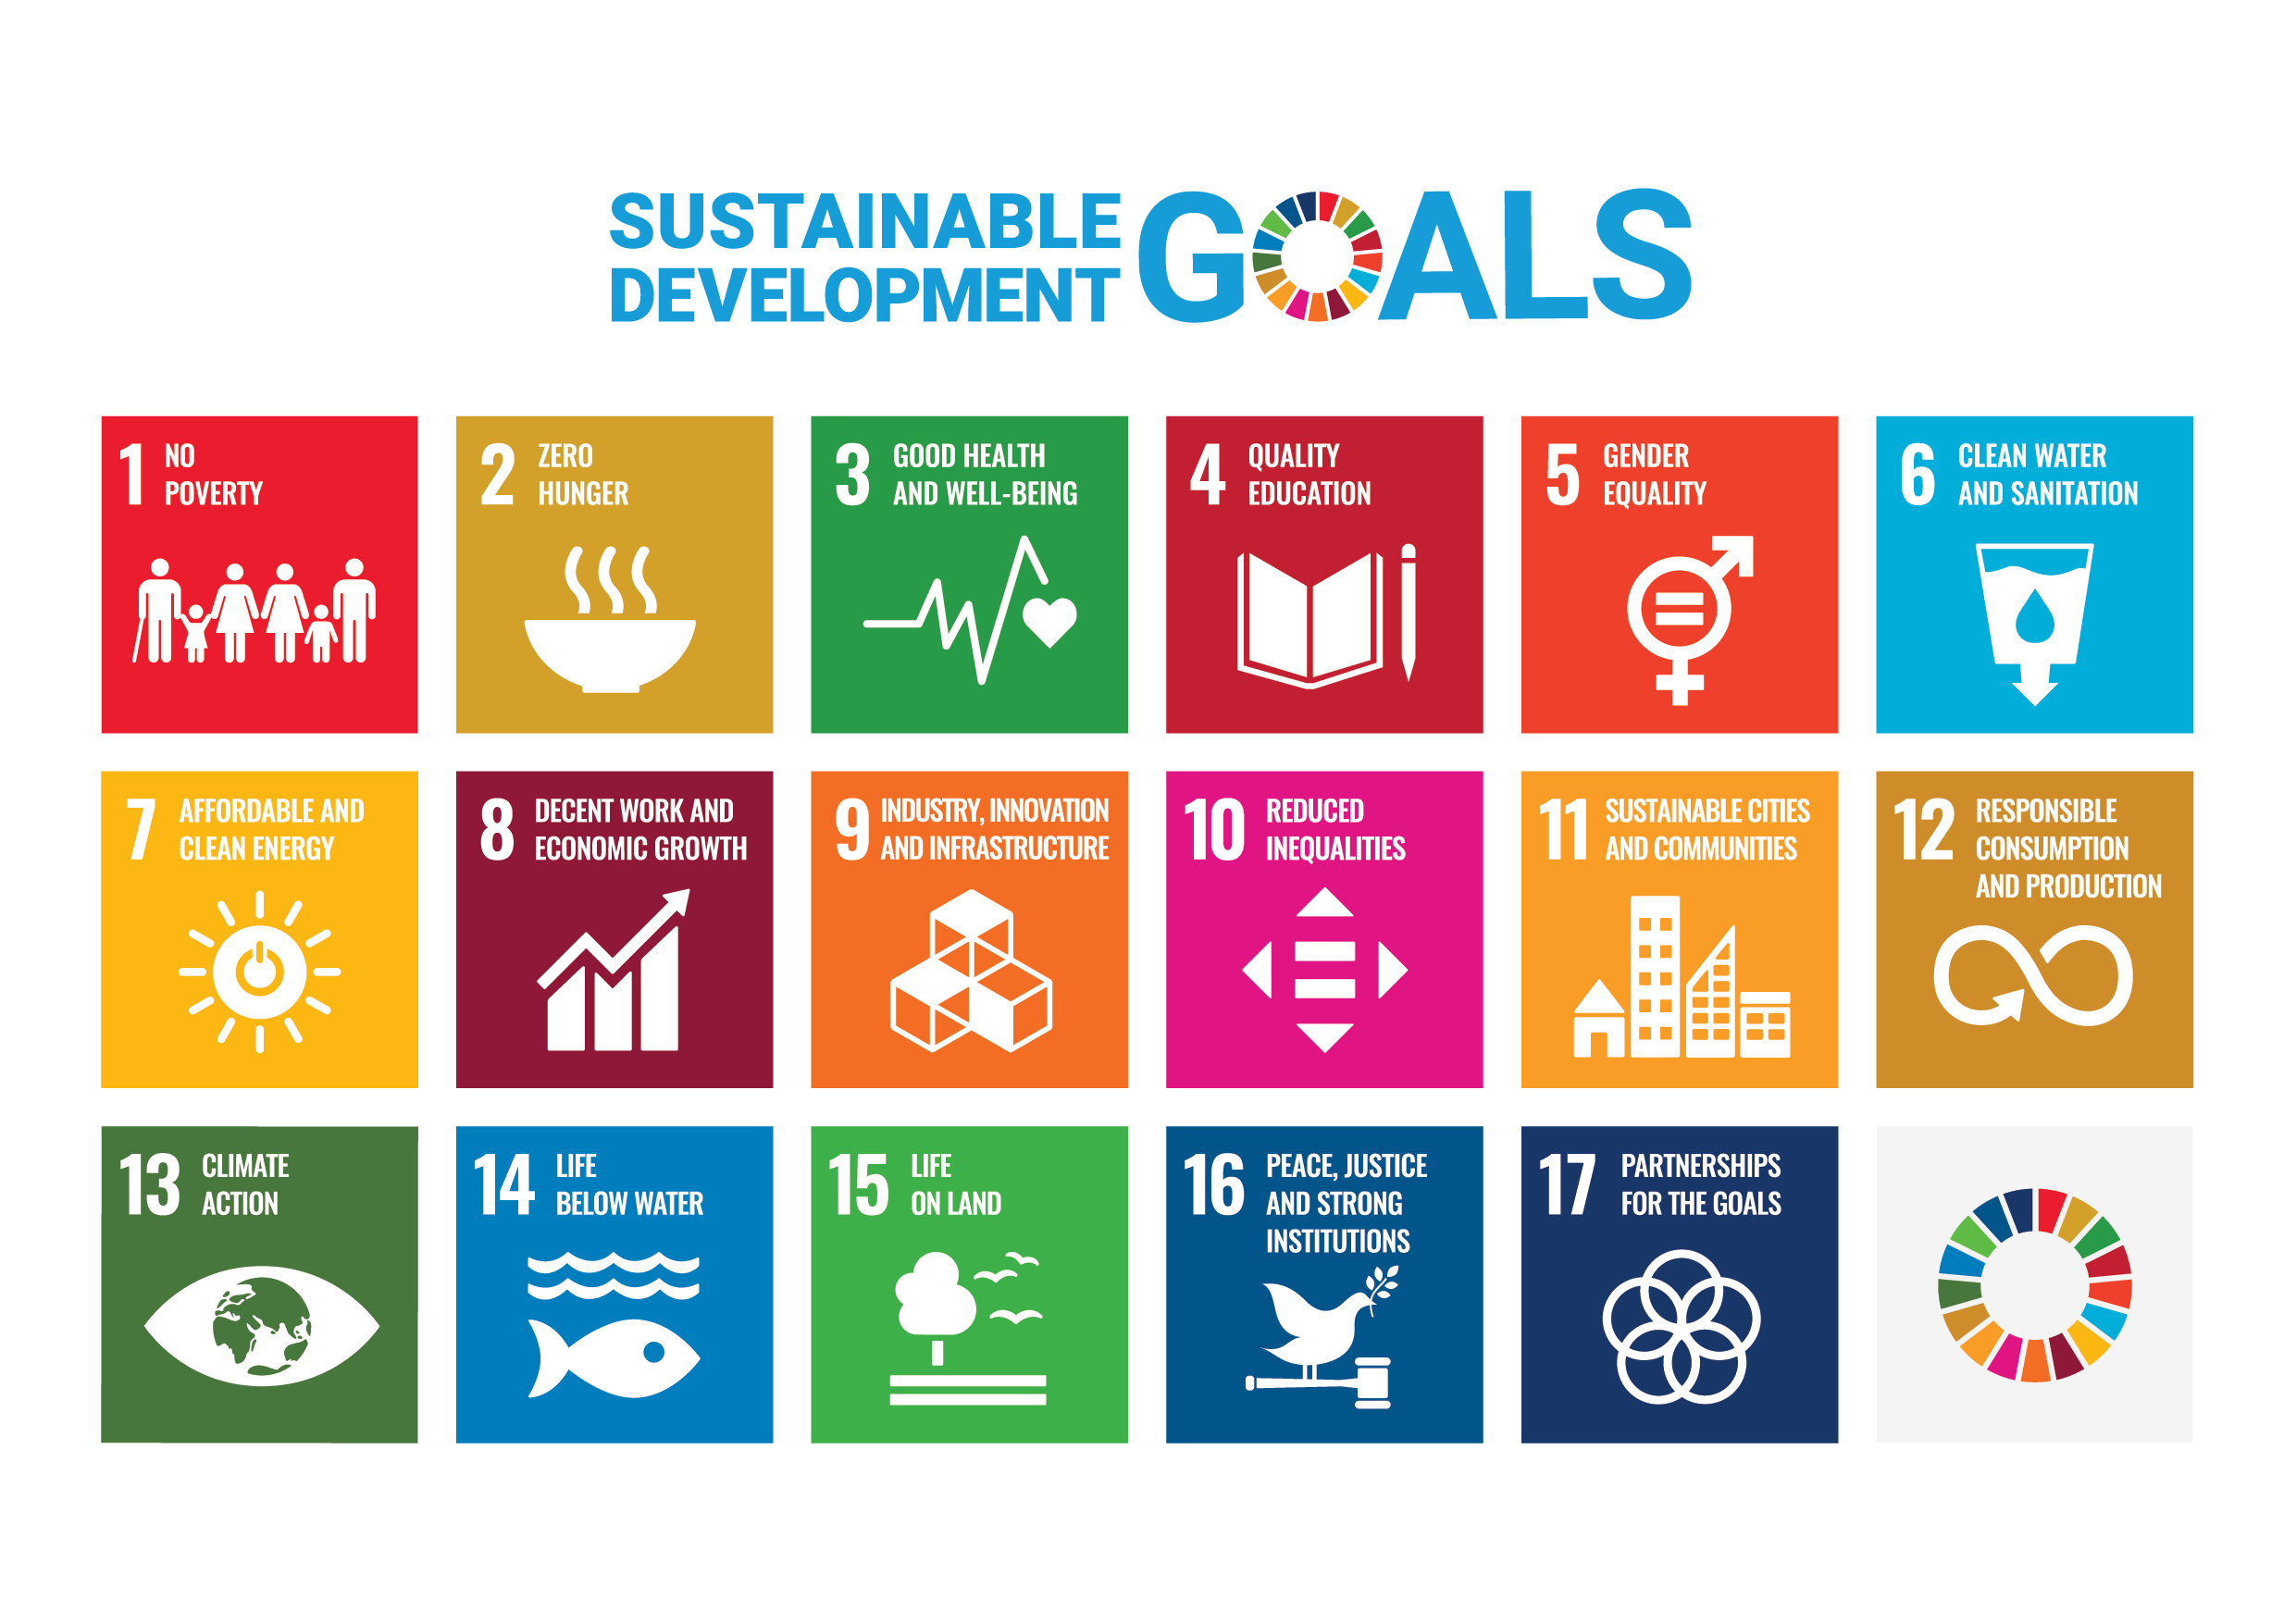 SUSTAINABLE DEVELOPMENT GOALS  17 goals to change the world 1. No Poverty
       2. Zero Hunger
       3. Good Health and Well-being
       4. Quality Education
       5. Gender Equality
       6. Clean Water and Sanitation
       7. Affordable and Clean Energy
       8. Decent Work and Economic Growth
       9. Industry, Innovation, and Infrastructure
       10. Reduced Inequality
       11. Sustainable Cities and Communities
       12. Responsible Consumption and Production
       13. Climate Action
       14. Life Below Water
       15. Life on Land
       16. Peace, Justice, and Strong Institutions
       17. Partnerships for the Goals  These are the Sustainable Development Goals towards 2030